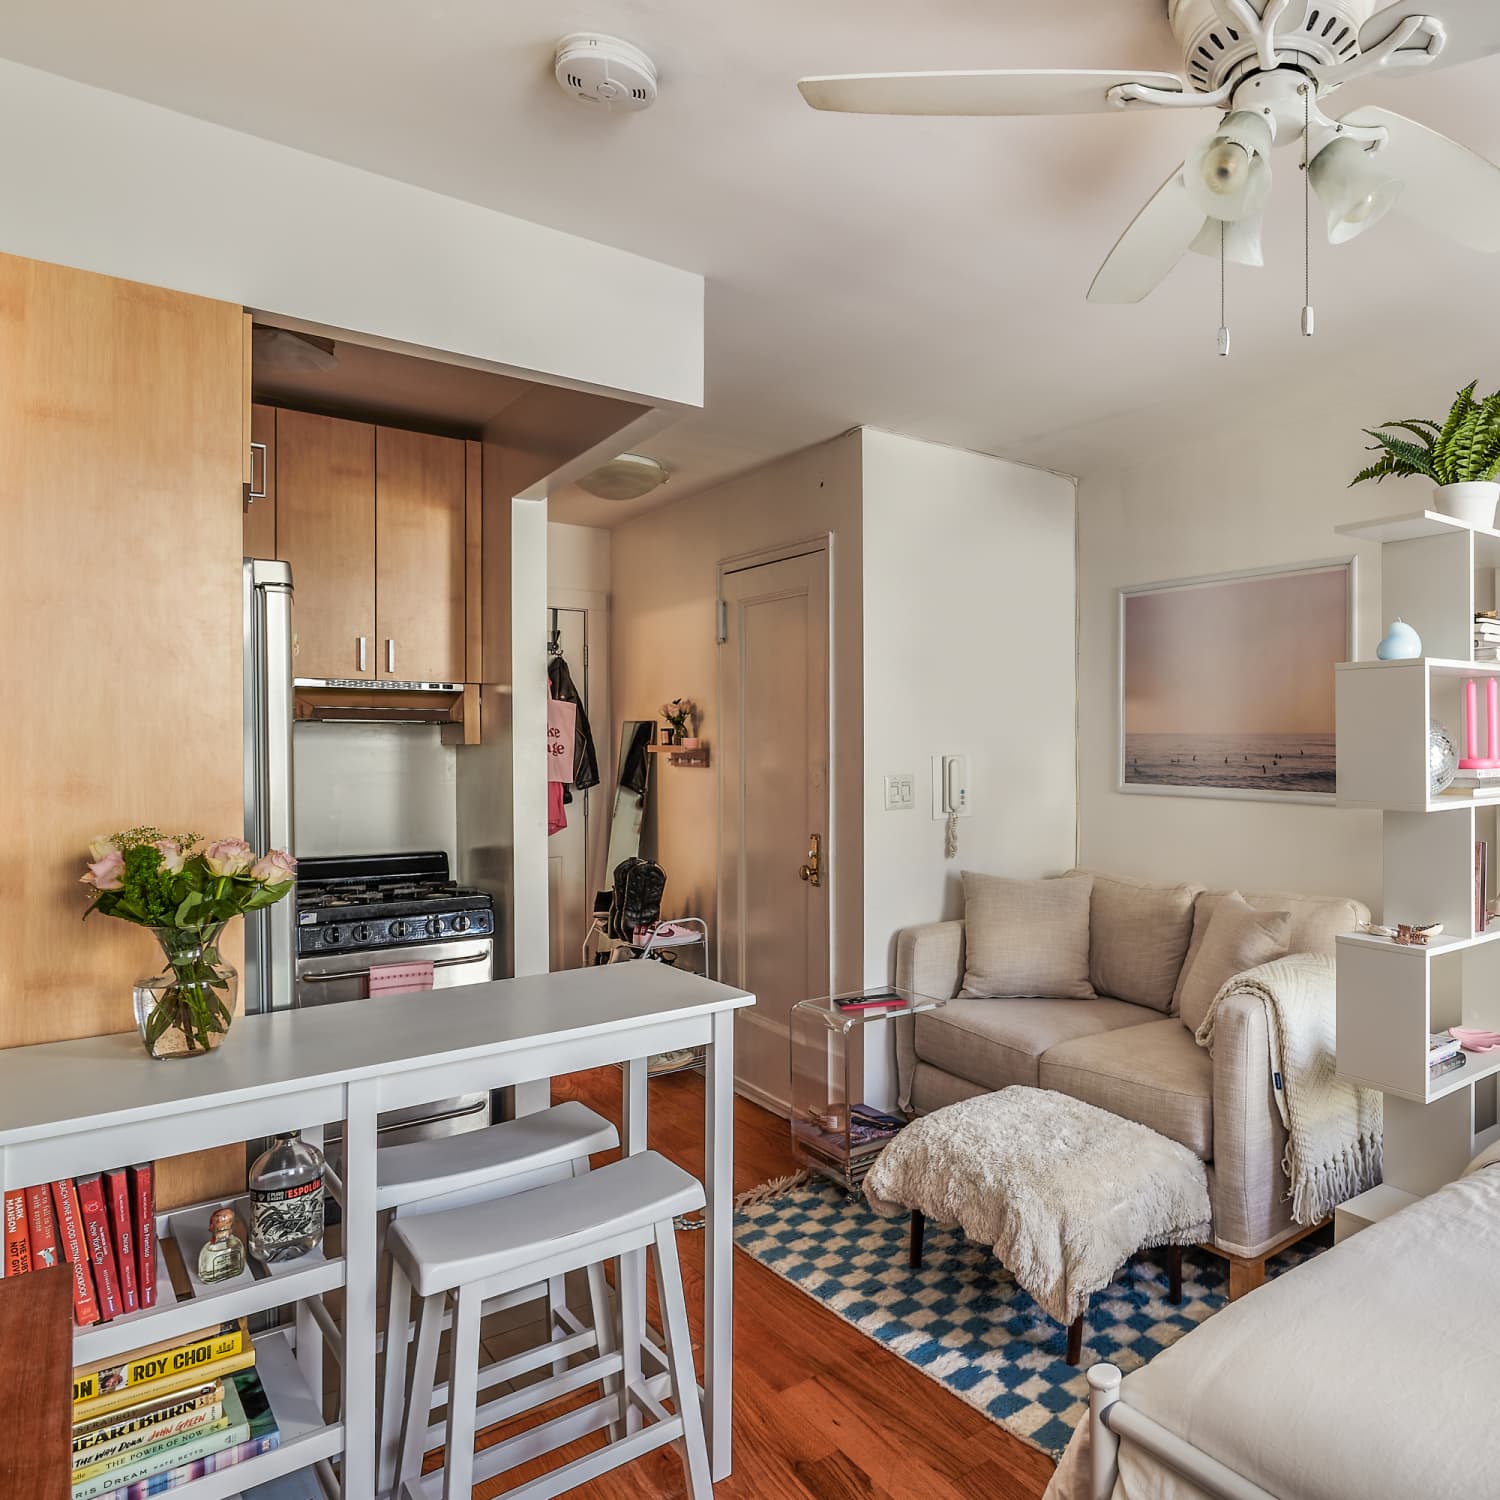 These Space-Saving Pieces of Furniture Maximize My 620-Square-Foot Apartment Apartment Therapy